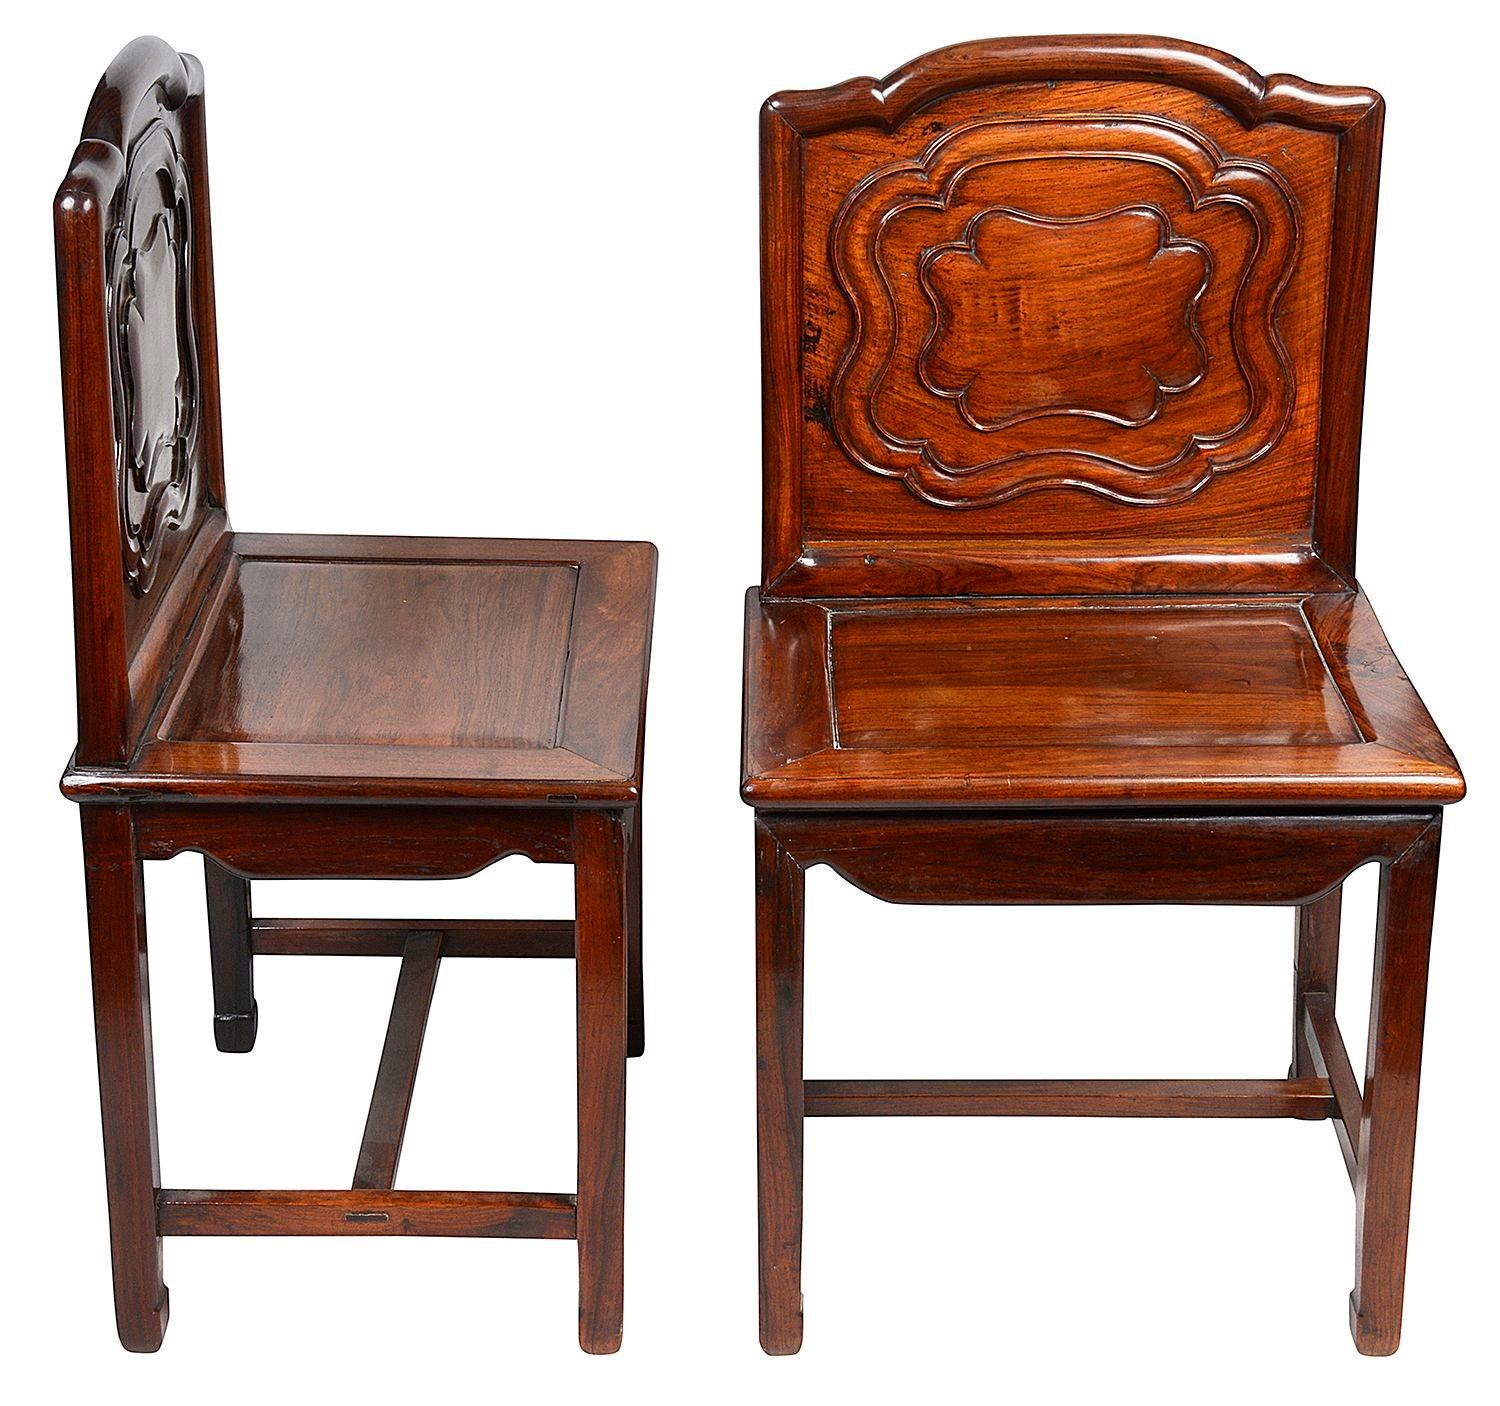 A very good quality pair of late 19th Century Chinese hardwood side chairs, each with hand carved panels the the backrest, inset panel seats, raised on square section legs, united by an H stretcher, and an apron around the frieze,


Batch 75 CNKZ